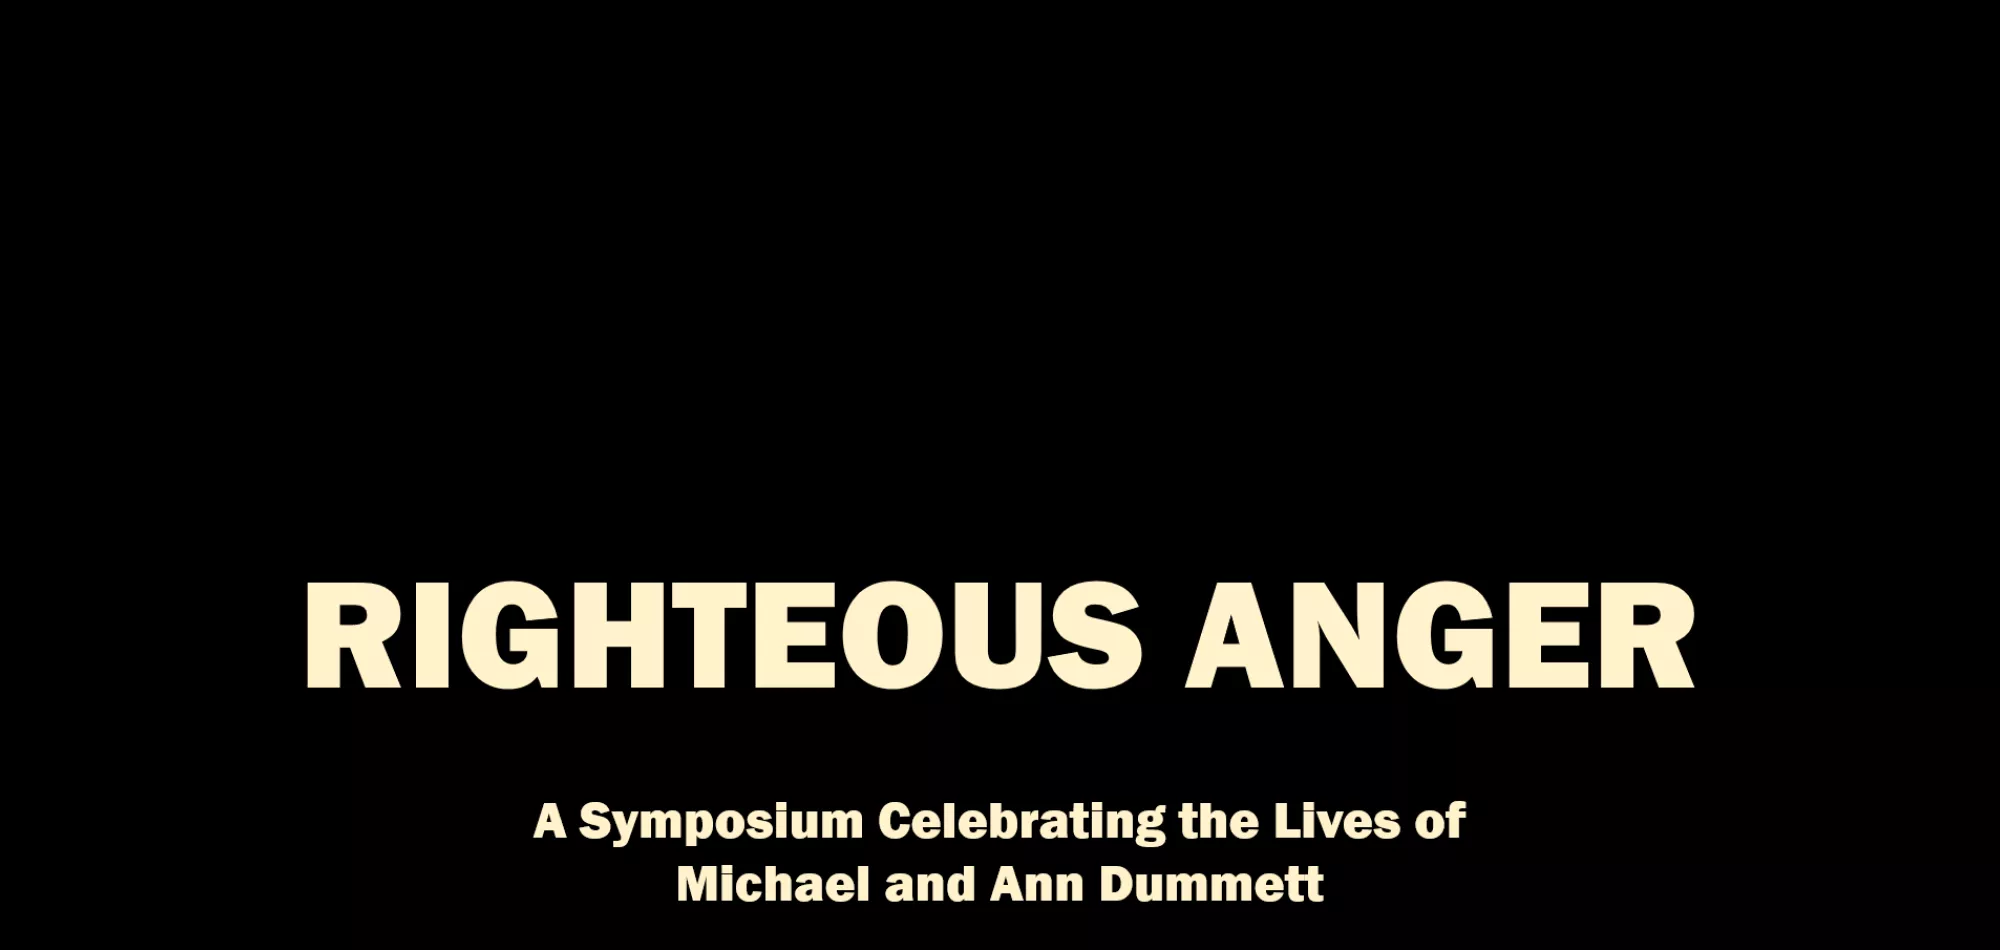 'Righteous Anger: A symposium celebrating the lives of Michael and Ann Dummett' on black background